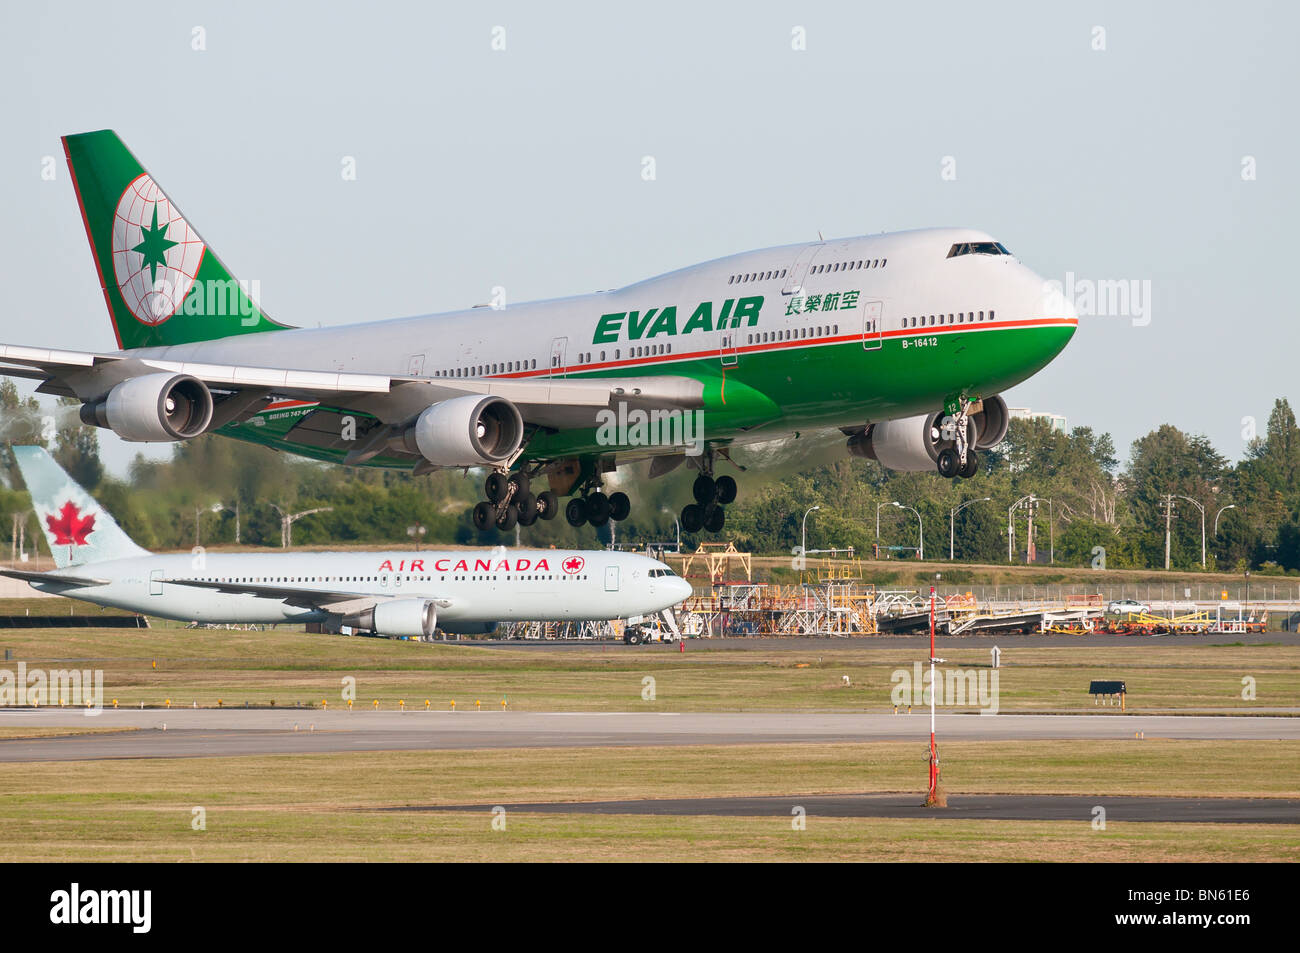 An EVA Air Boeing 747 (747-400) jet airliner landing at Vancouver International Airport. Stock Photo